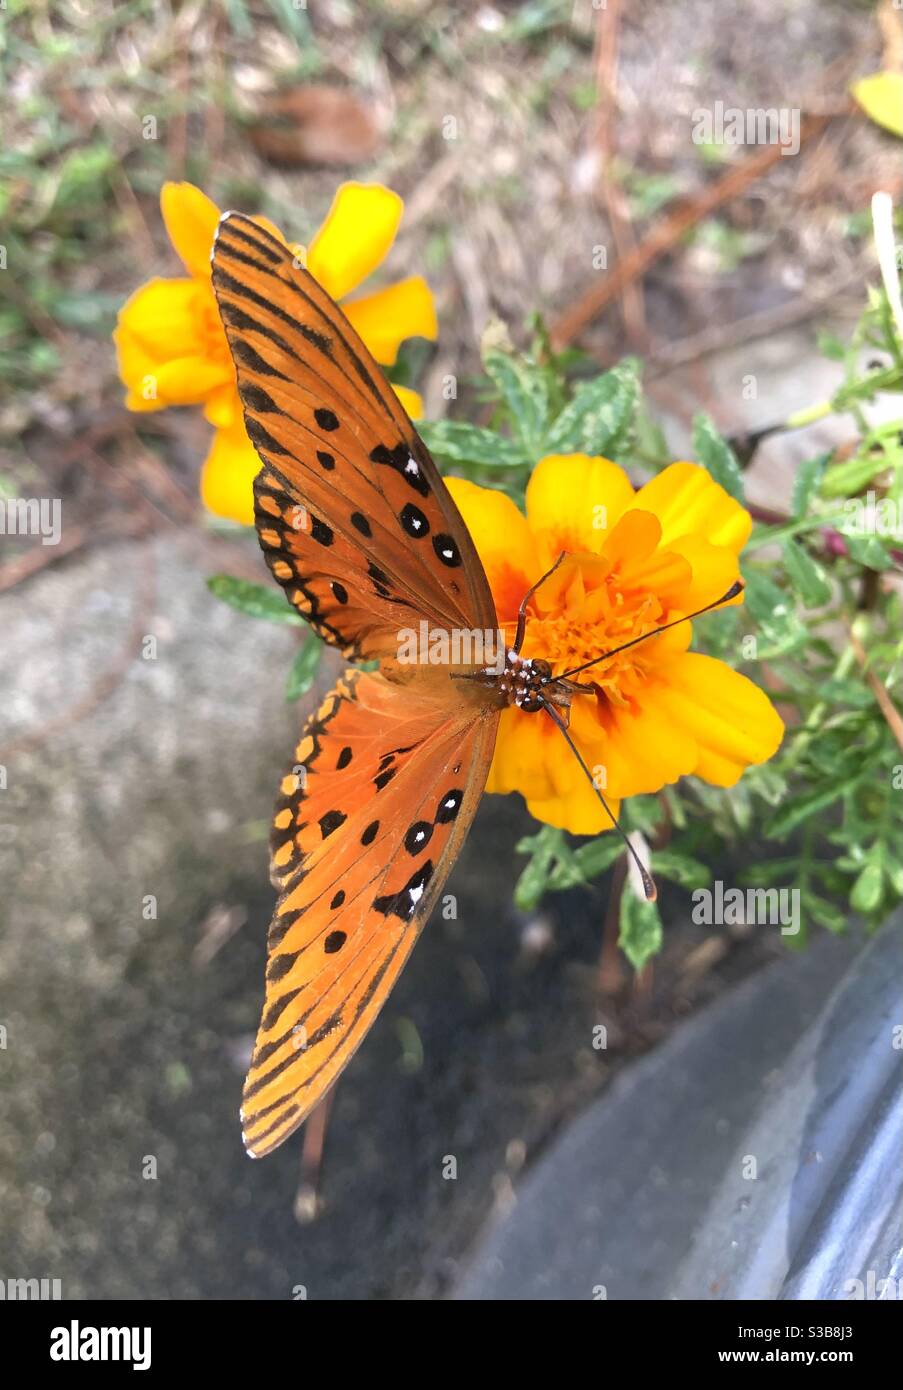 Gulf Fritillary butterfly with wide opened wings on marigold flower in coastal Georgia Stock Photo